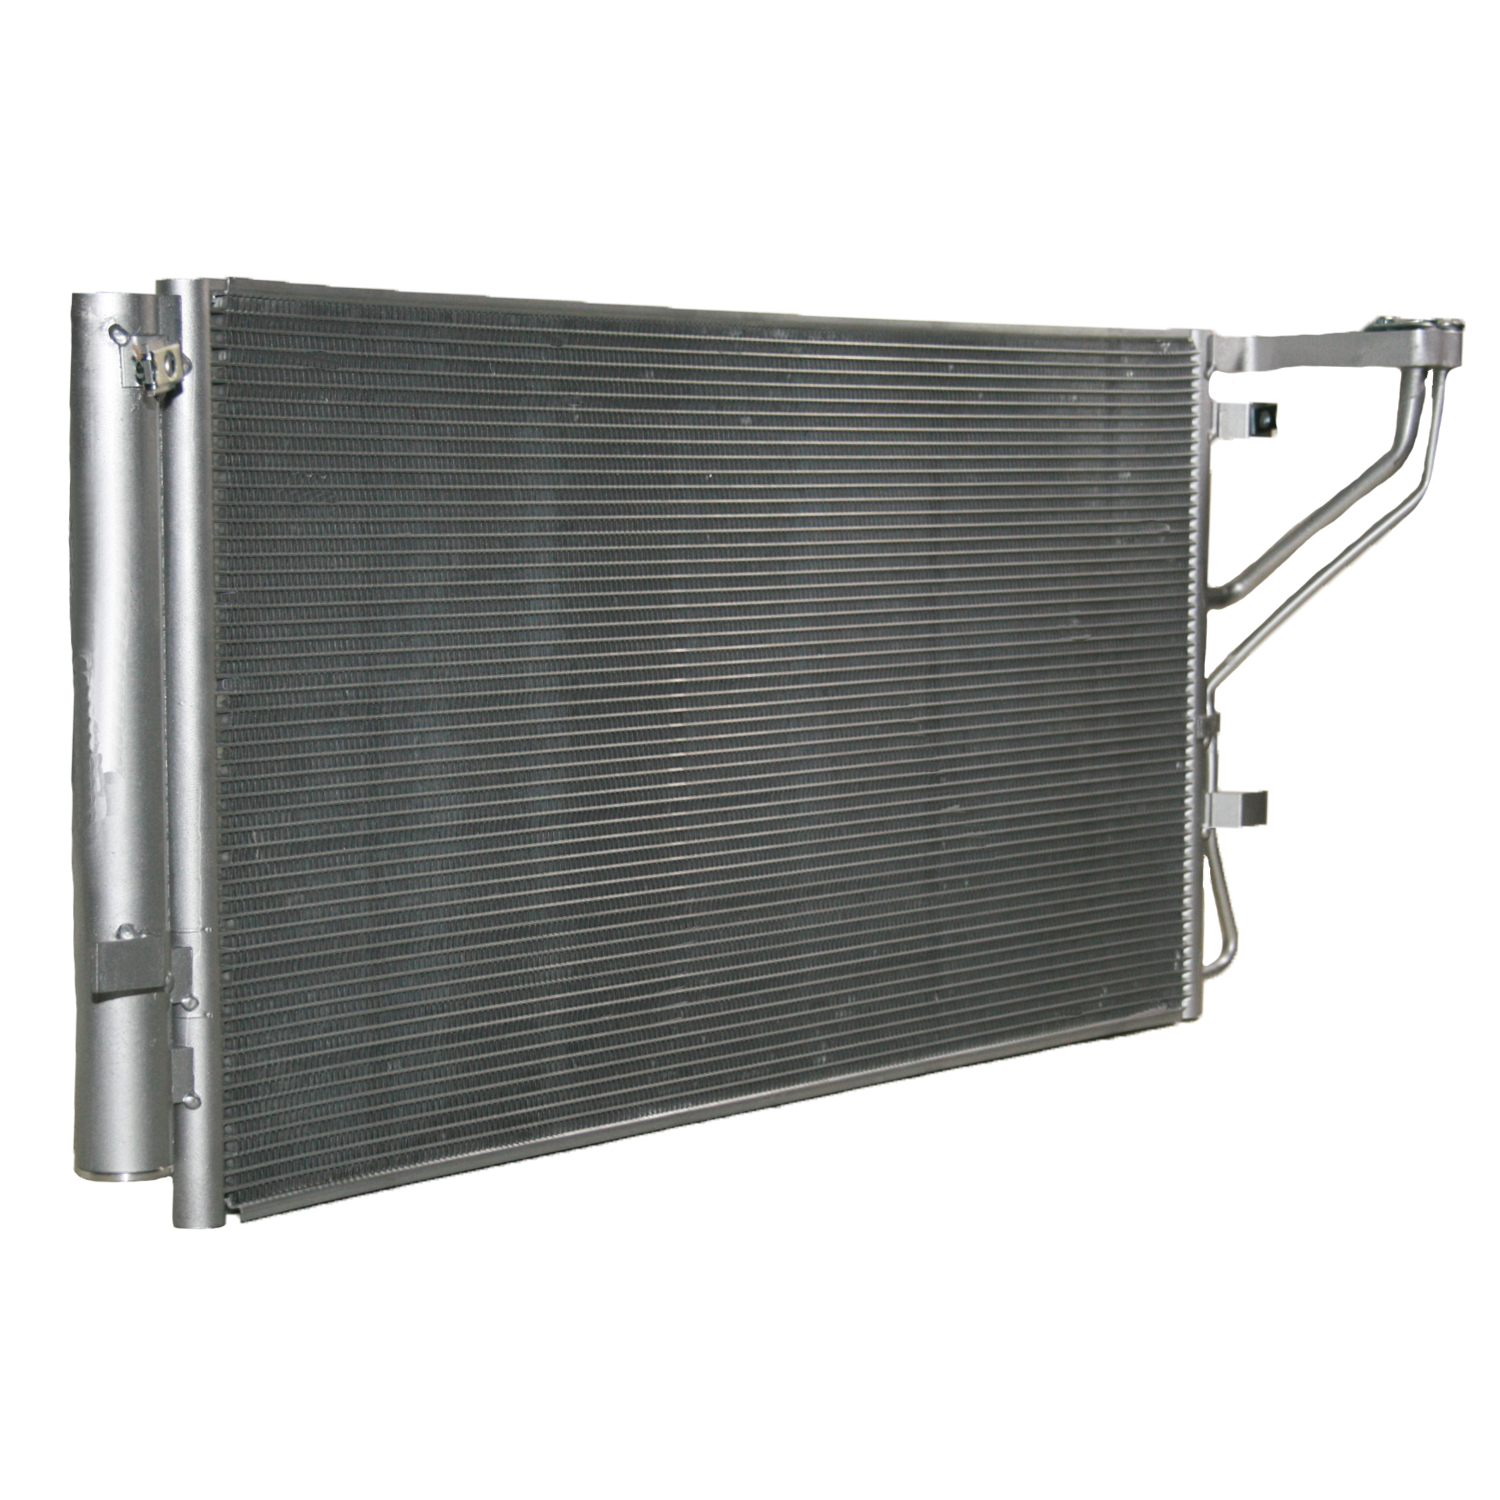 TCW Condenser 44-3658 New Product Image field_60b6a13a6e67c